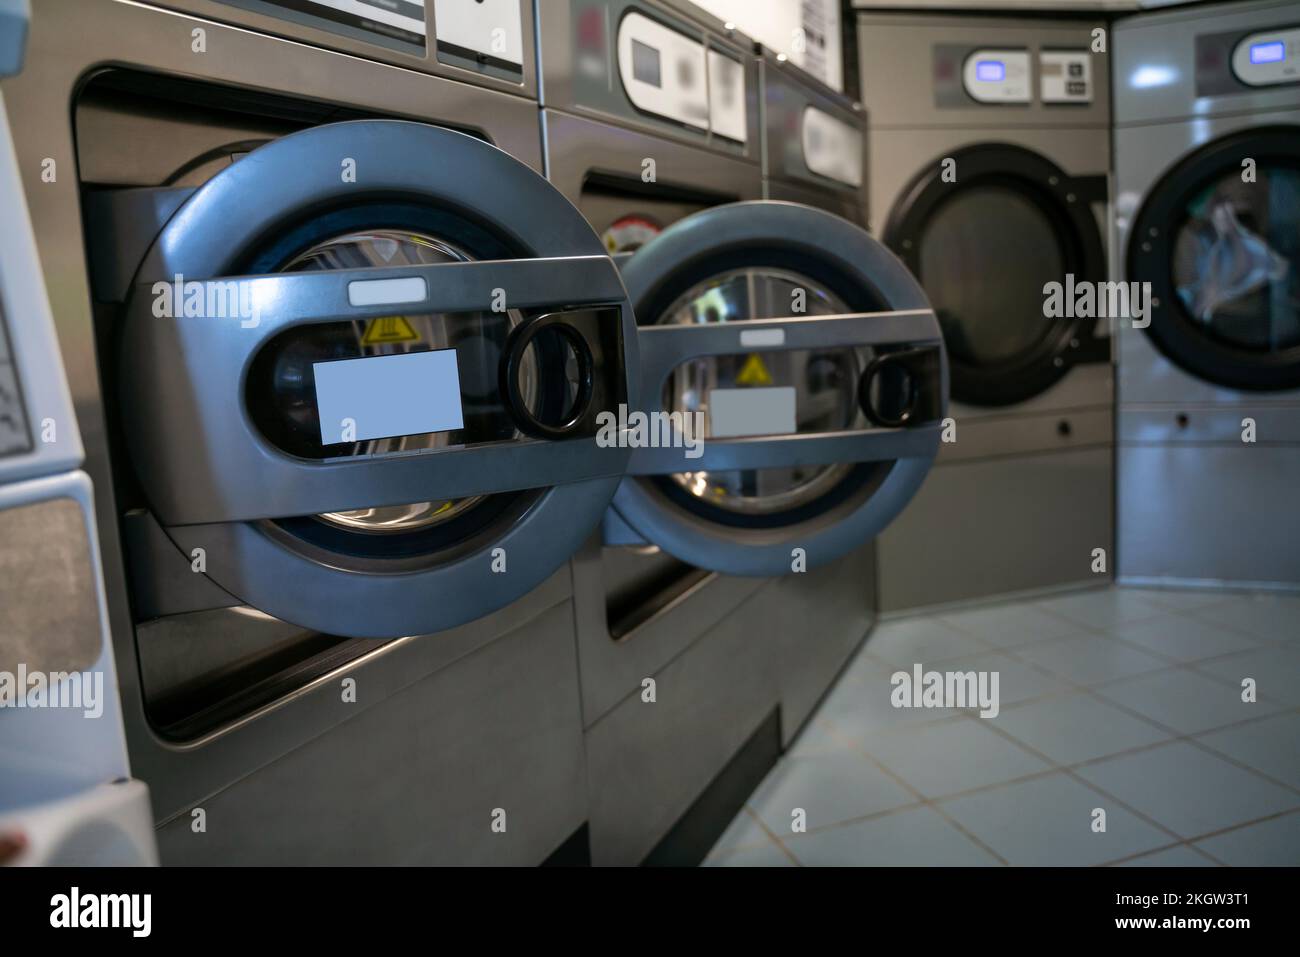 Shared laundry room with several front-loading washing machines Stock Photo